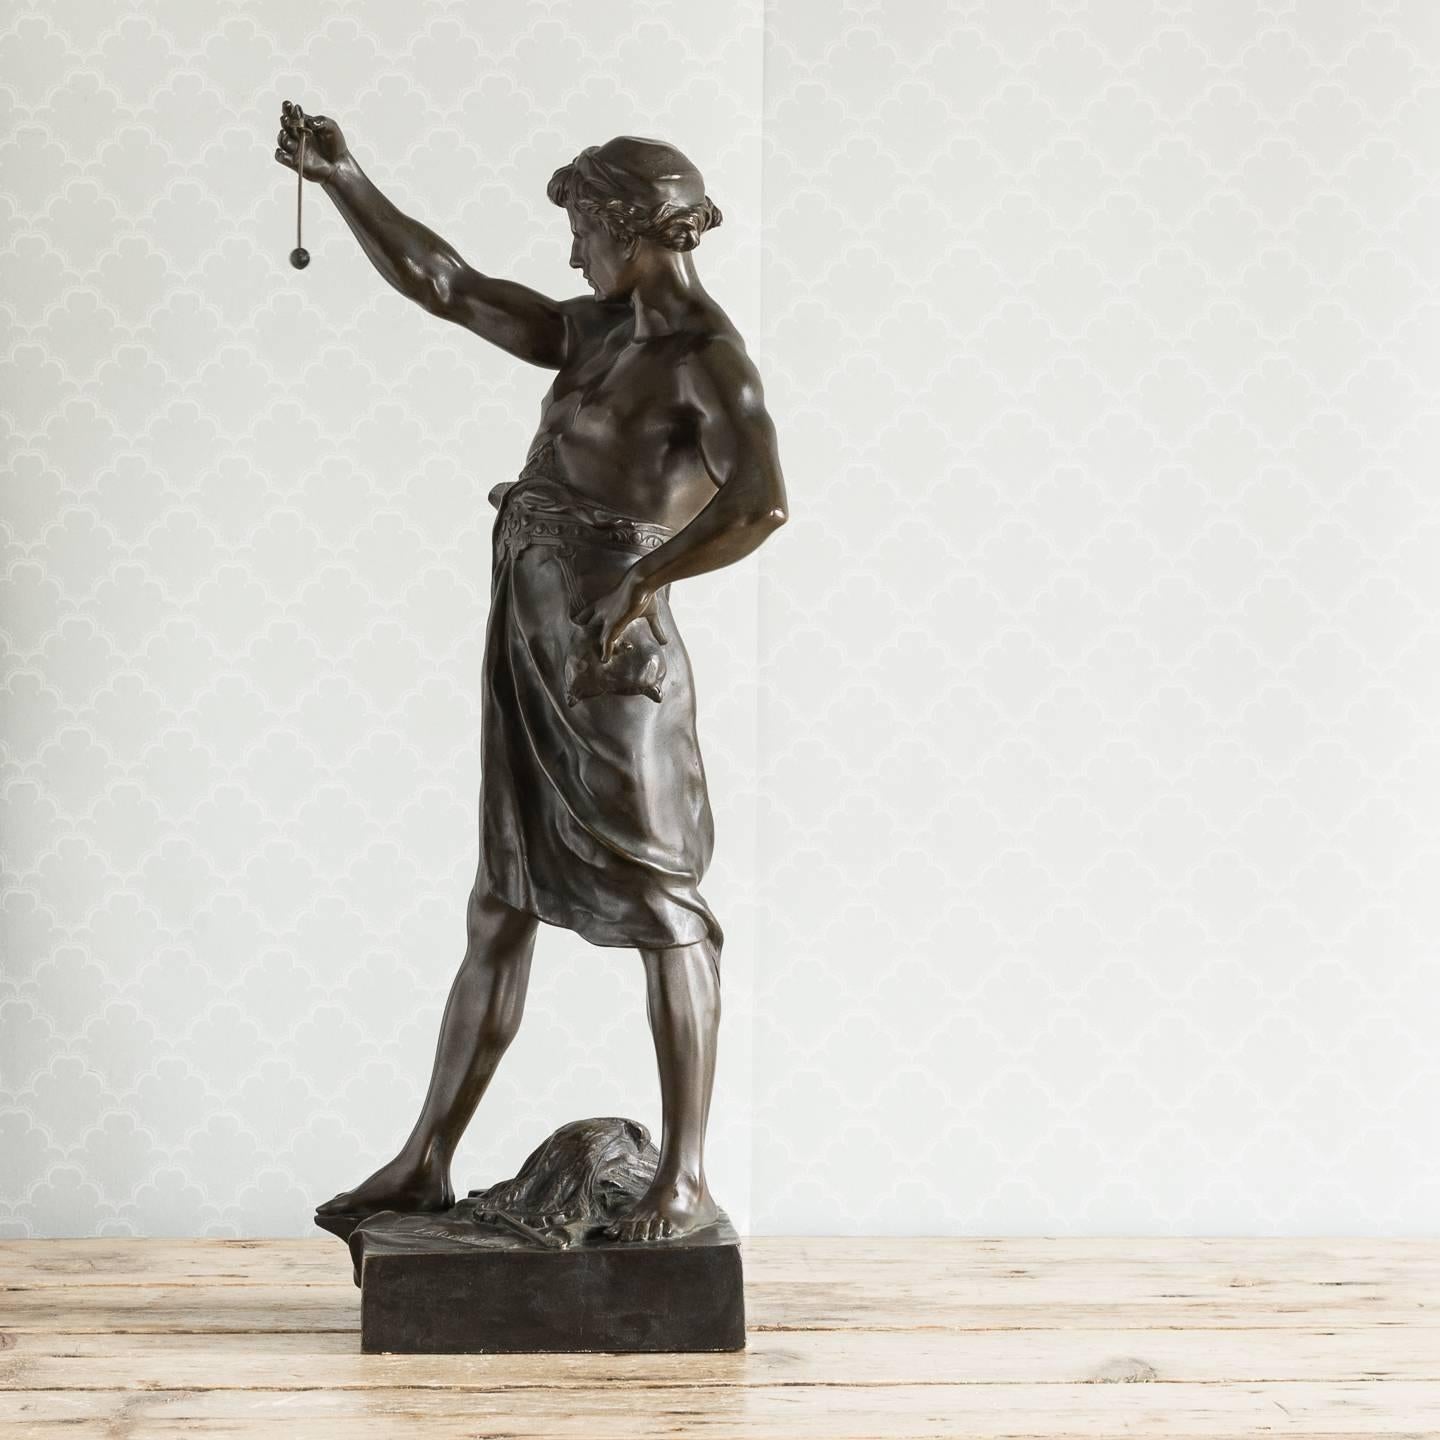 A French bronze figure of 'Glory and Fortune', by Emile Louis Picault, on plinth base, French, circa 1900.

Dimensions: 61cm (24